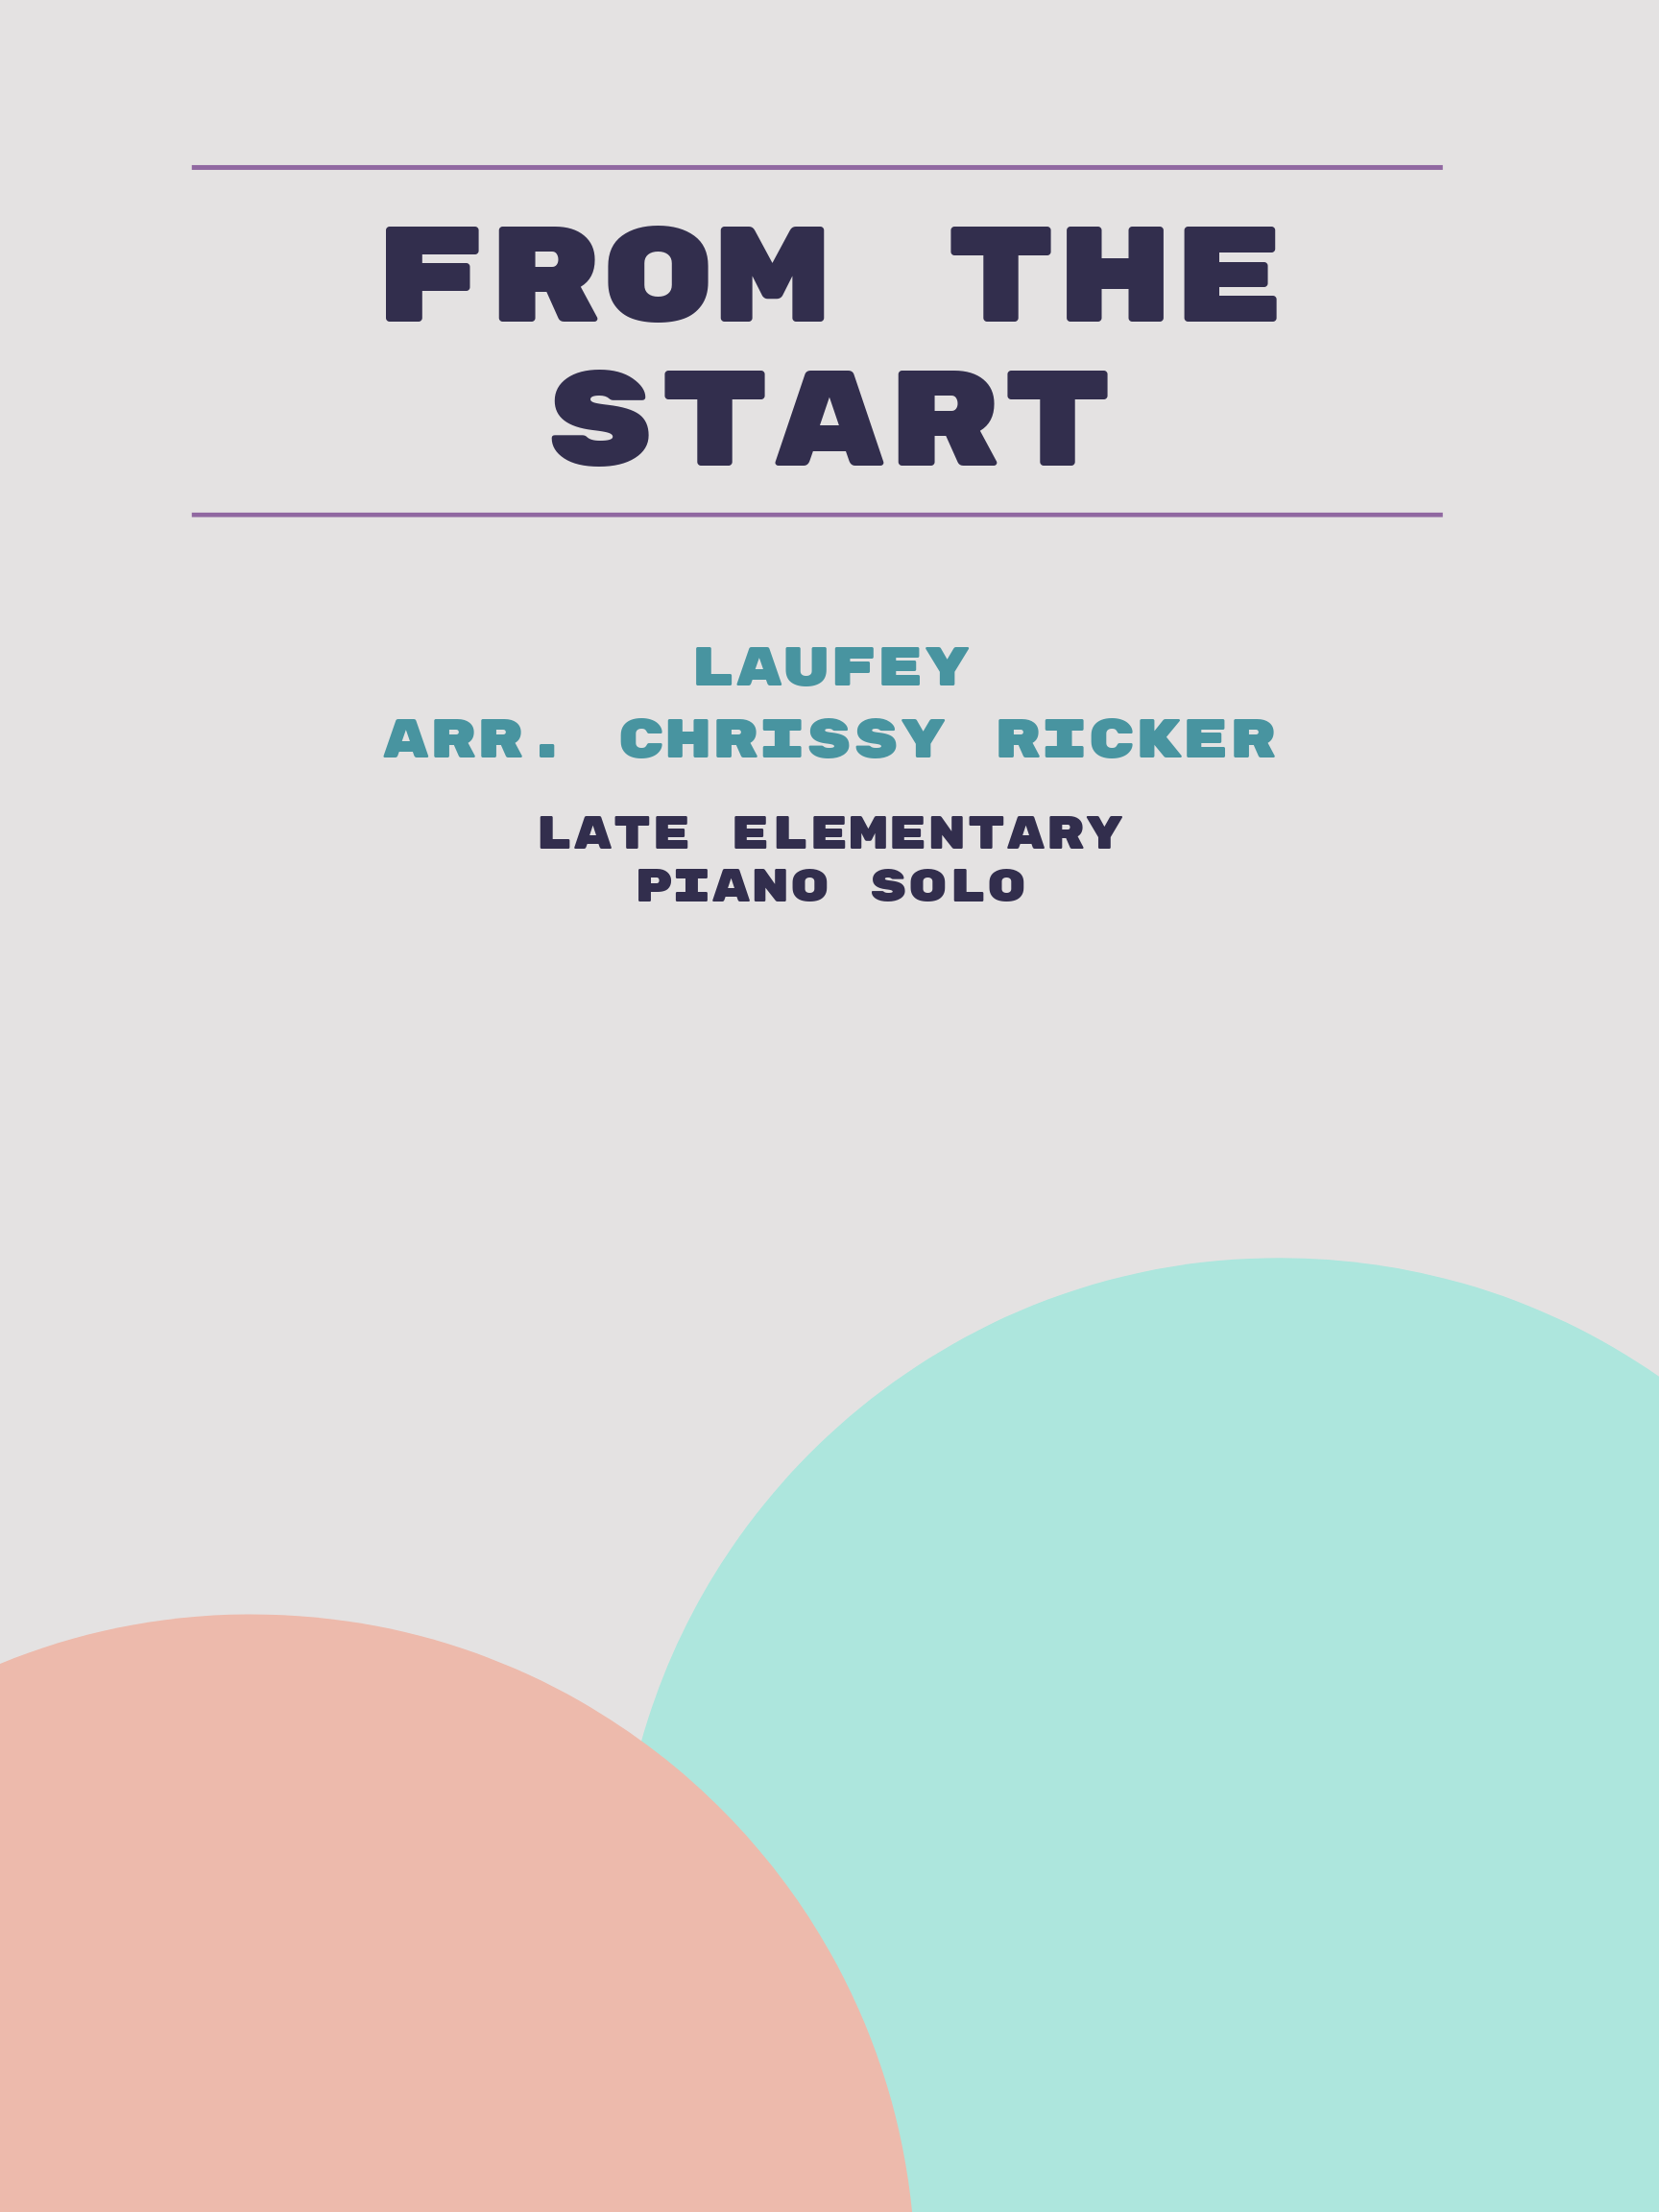 From the Start by Laufey